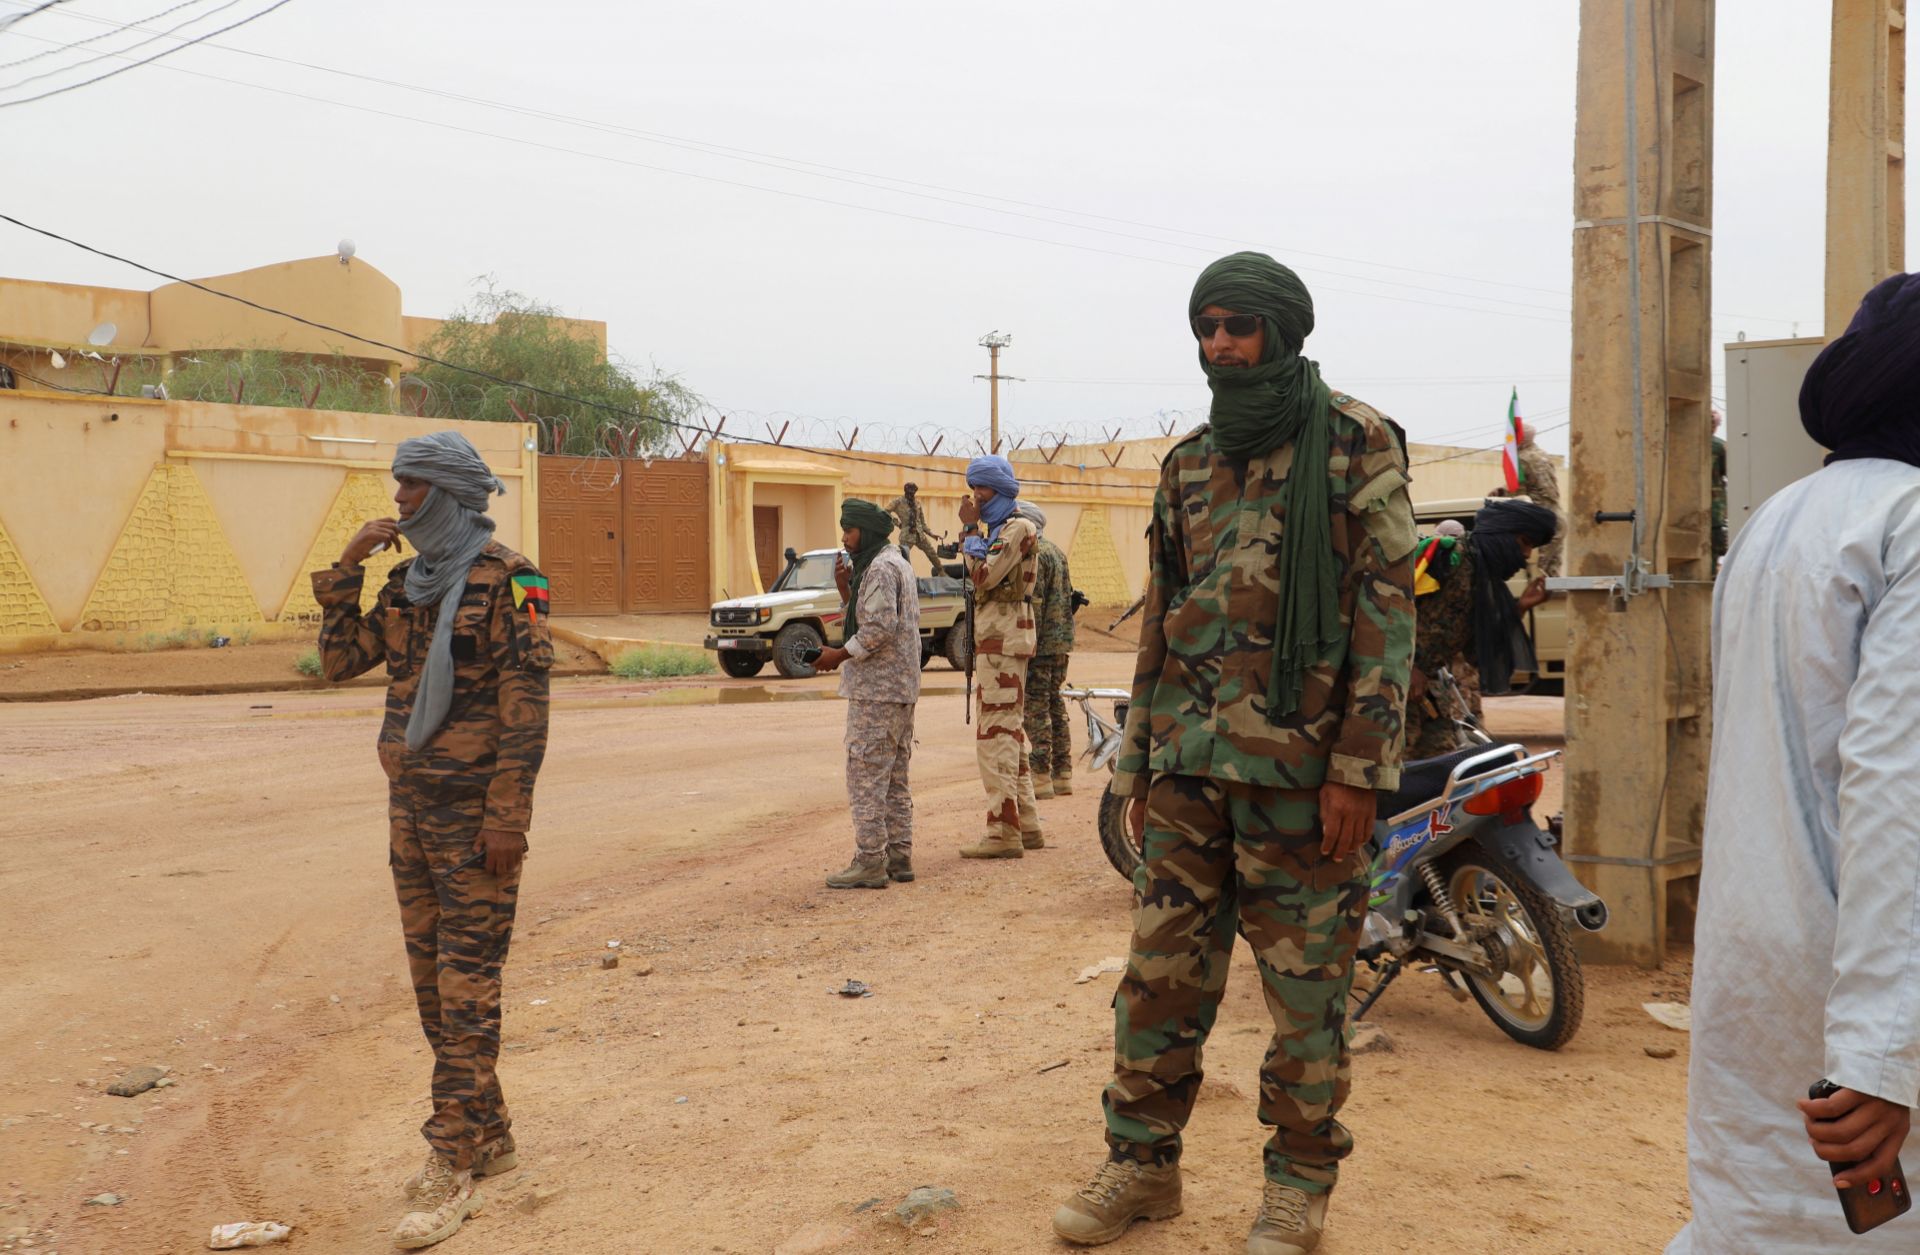 Fighters aligned with the National Movement for the Liberation of Azawad (MNLA) patrol a street in Kidal, northern Mali, on Aug. 28, 2022. 